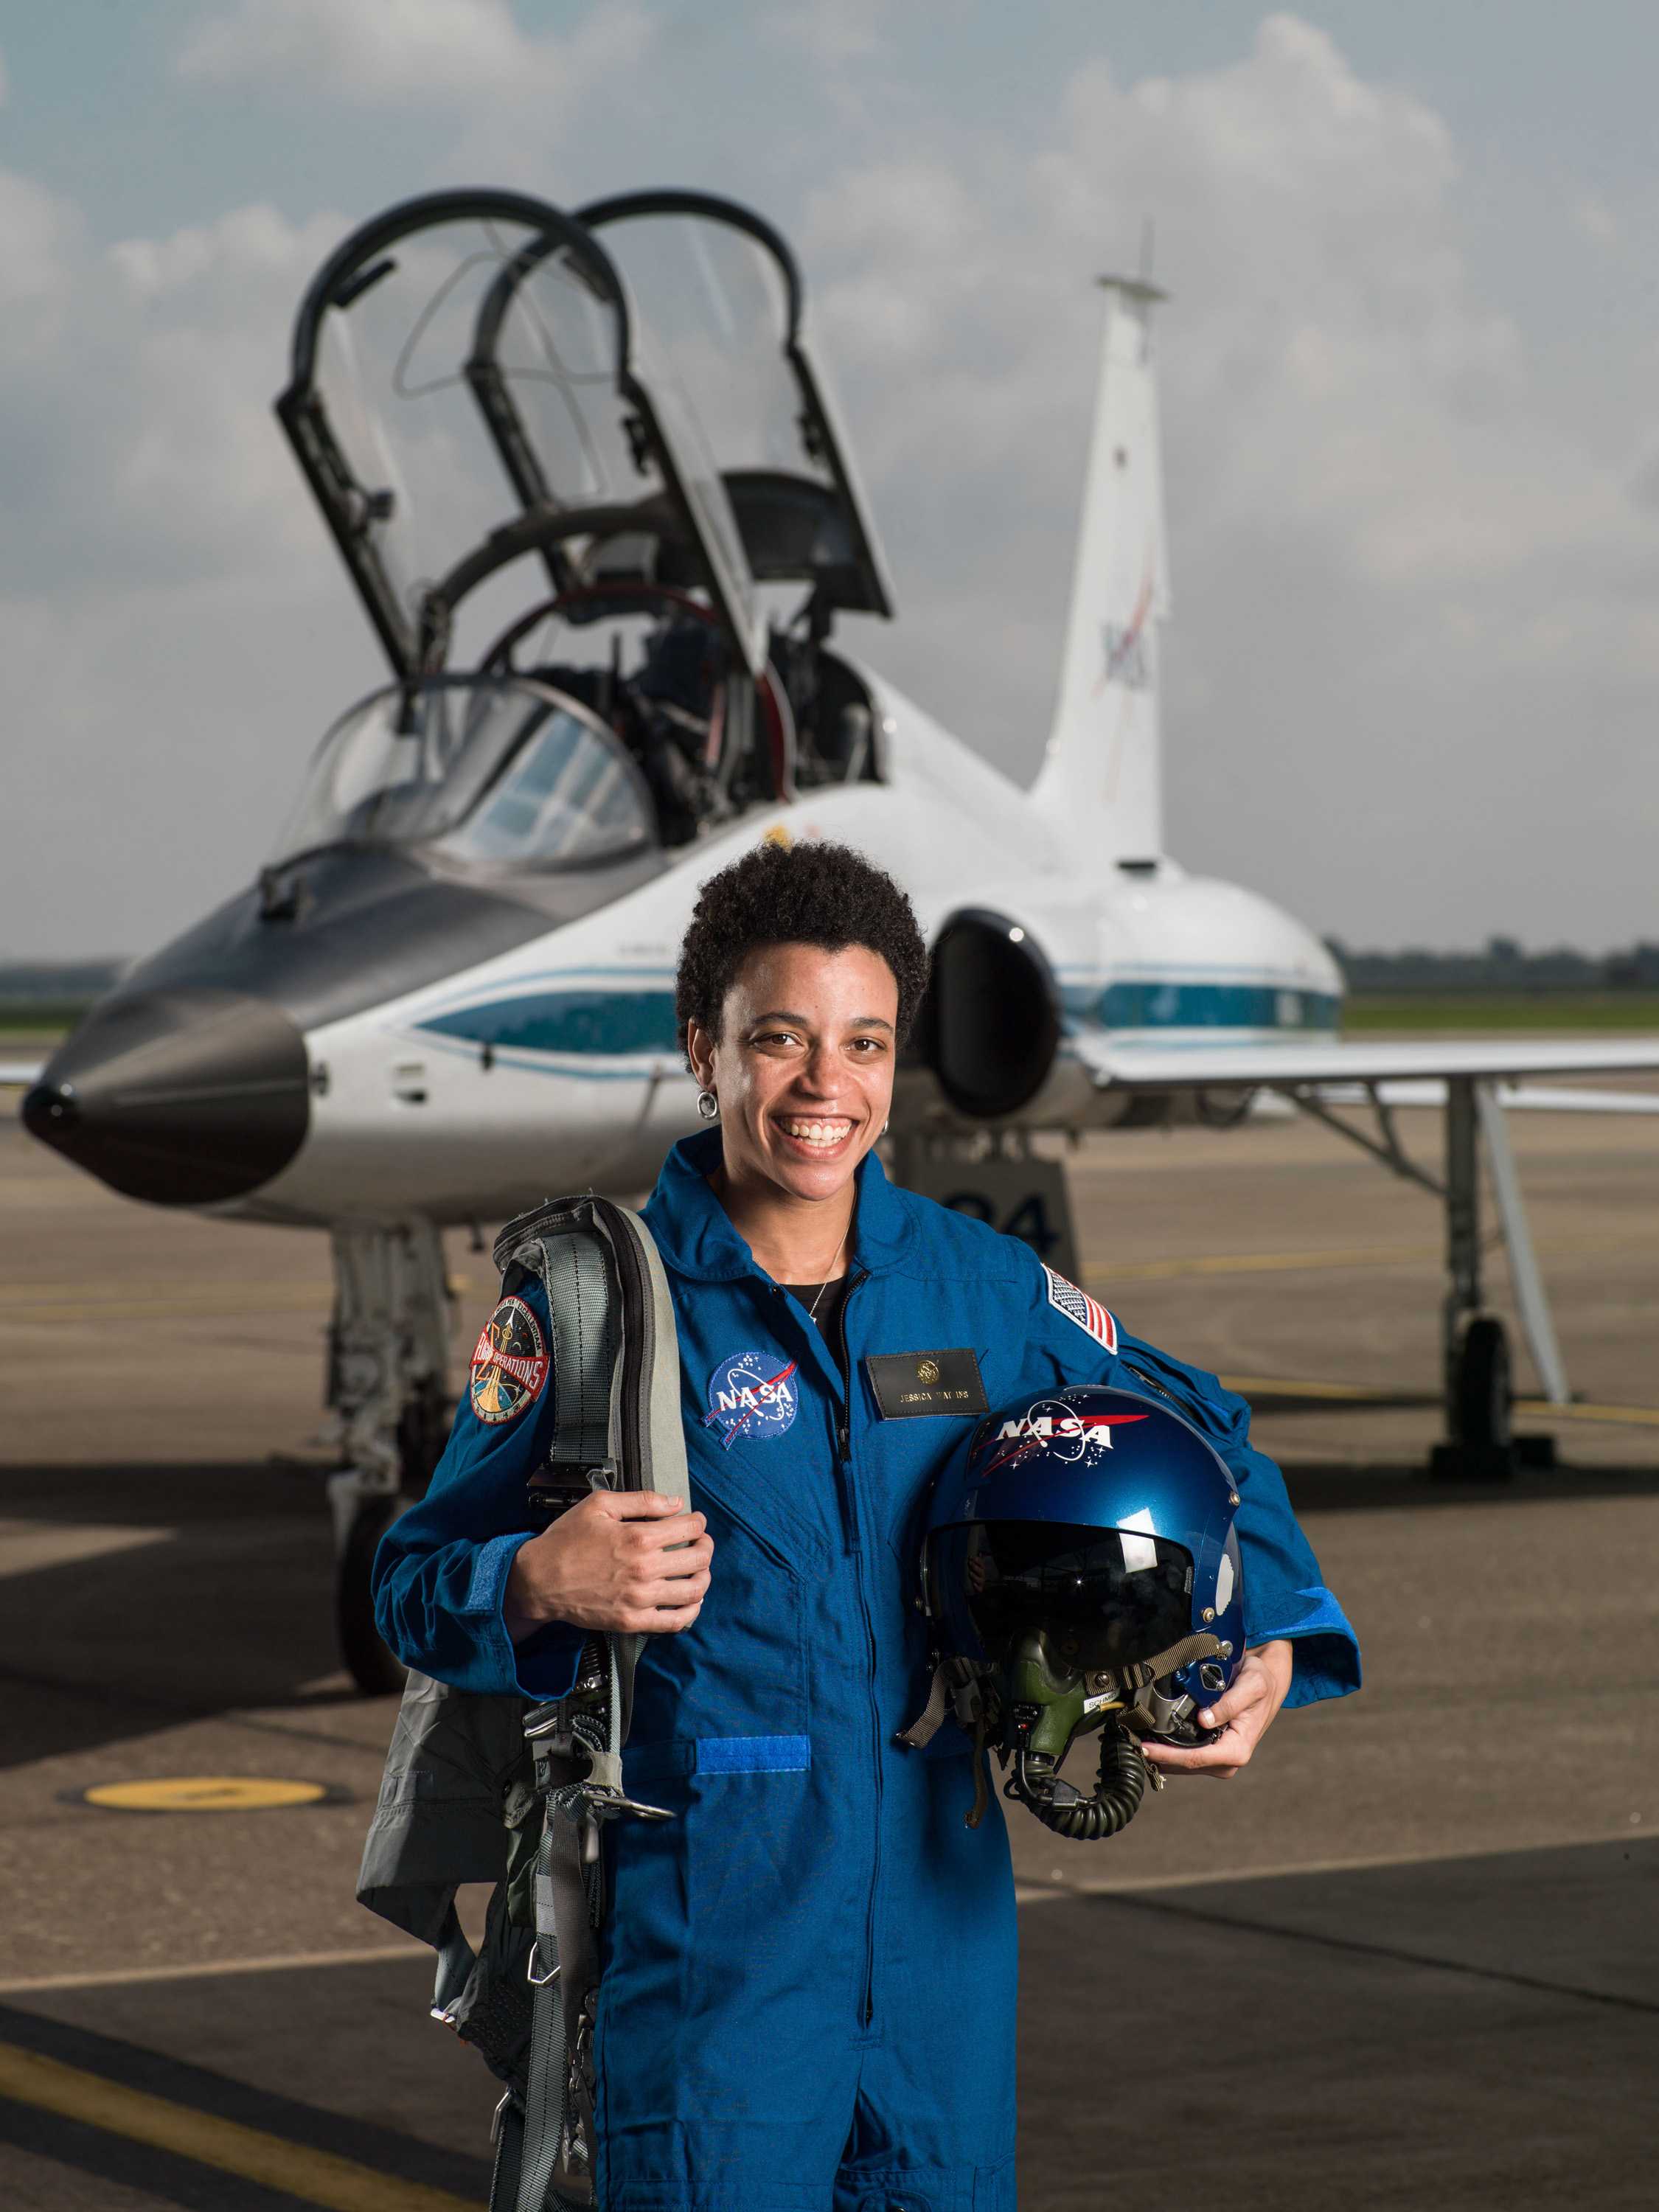 Watkins stands in front of an airplane, posing for a portrait. She is wearing a blue NASA suit and holding a helmet and gear.